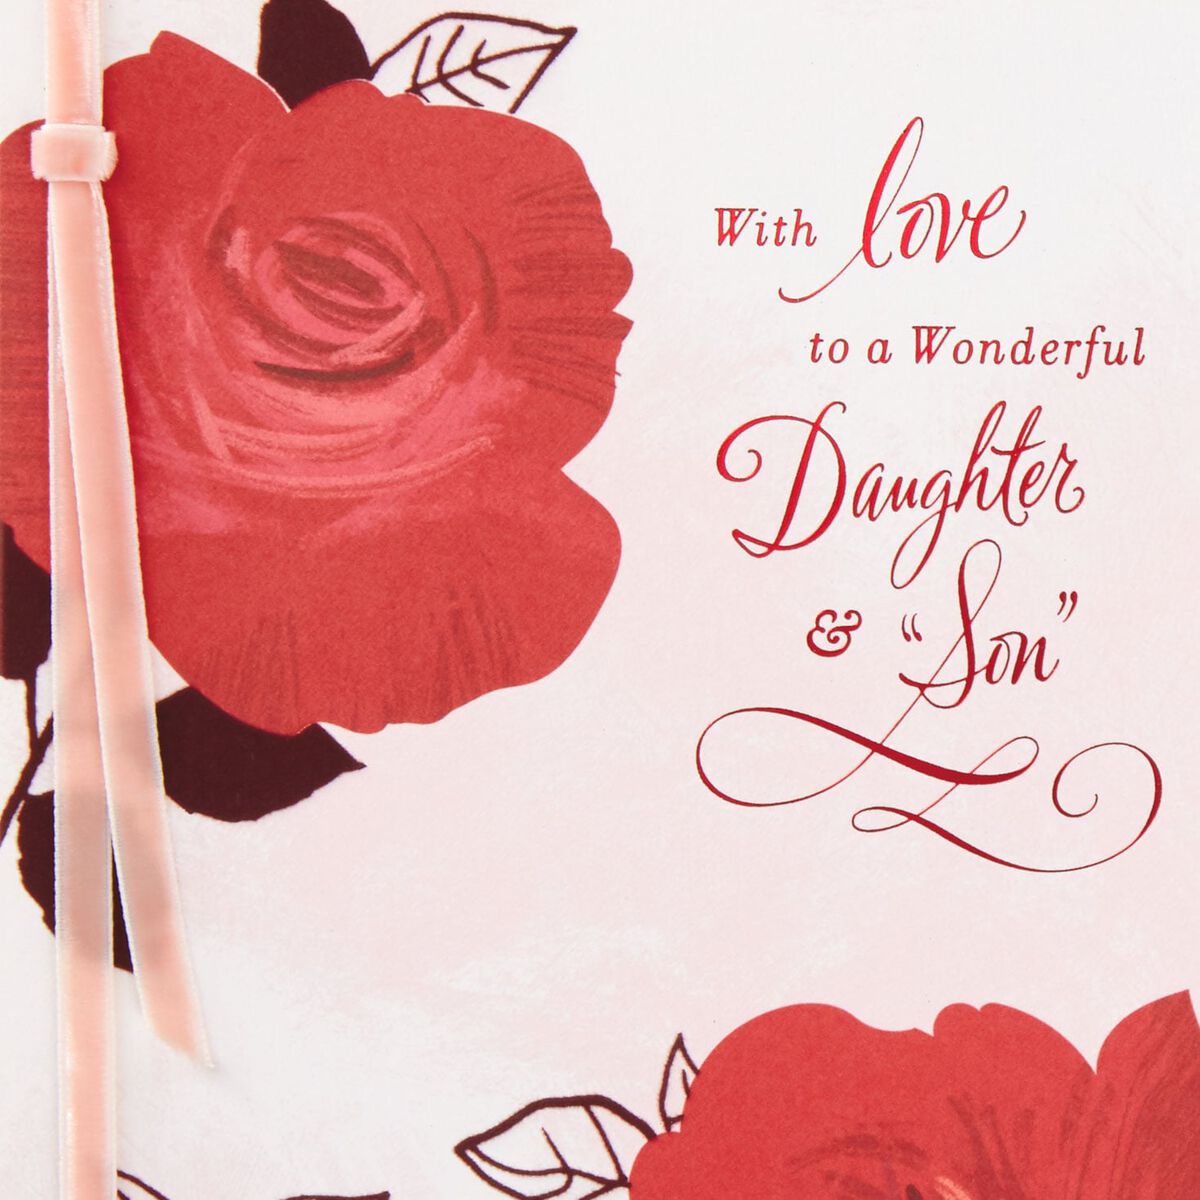 Two Roses Valentine #39 s Day Card for Daughter and Son in Law Greeting